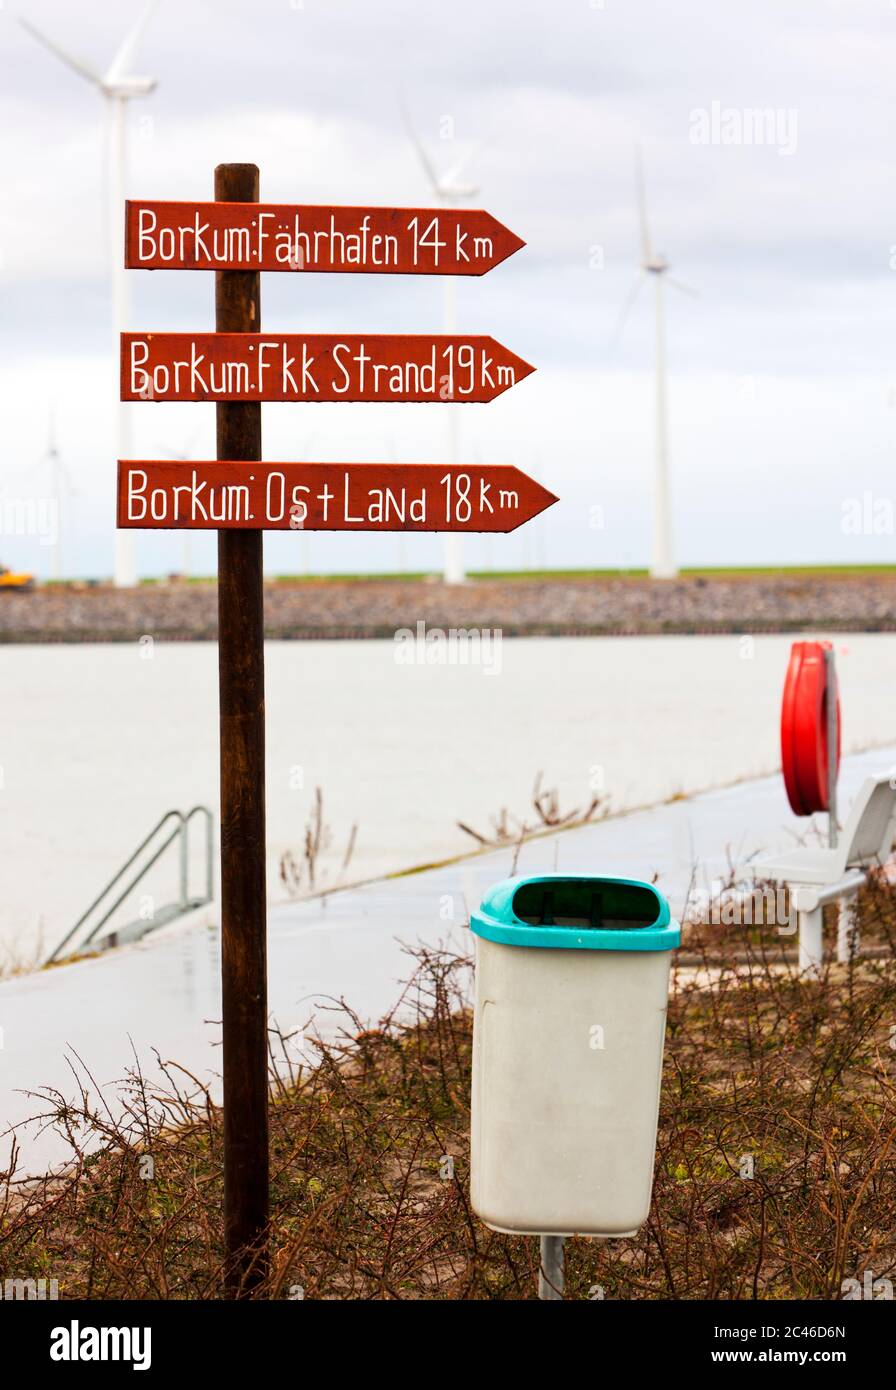 Signpost at Eemshaven ferry terminal with directional signs guiding to locations on the North Sea island of Borkum Stock Photo